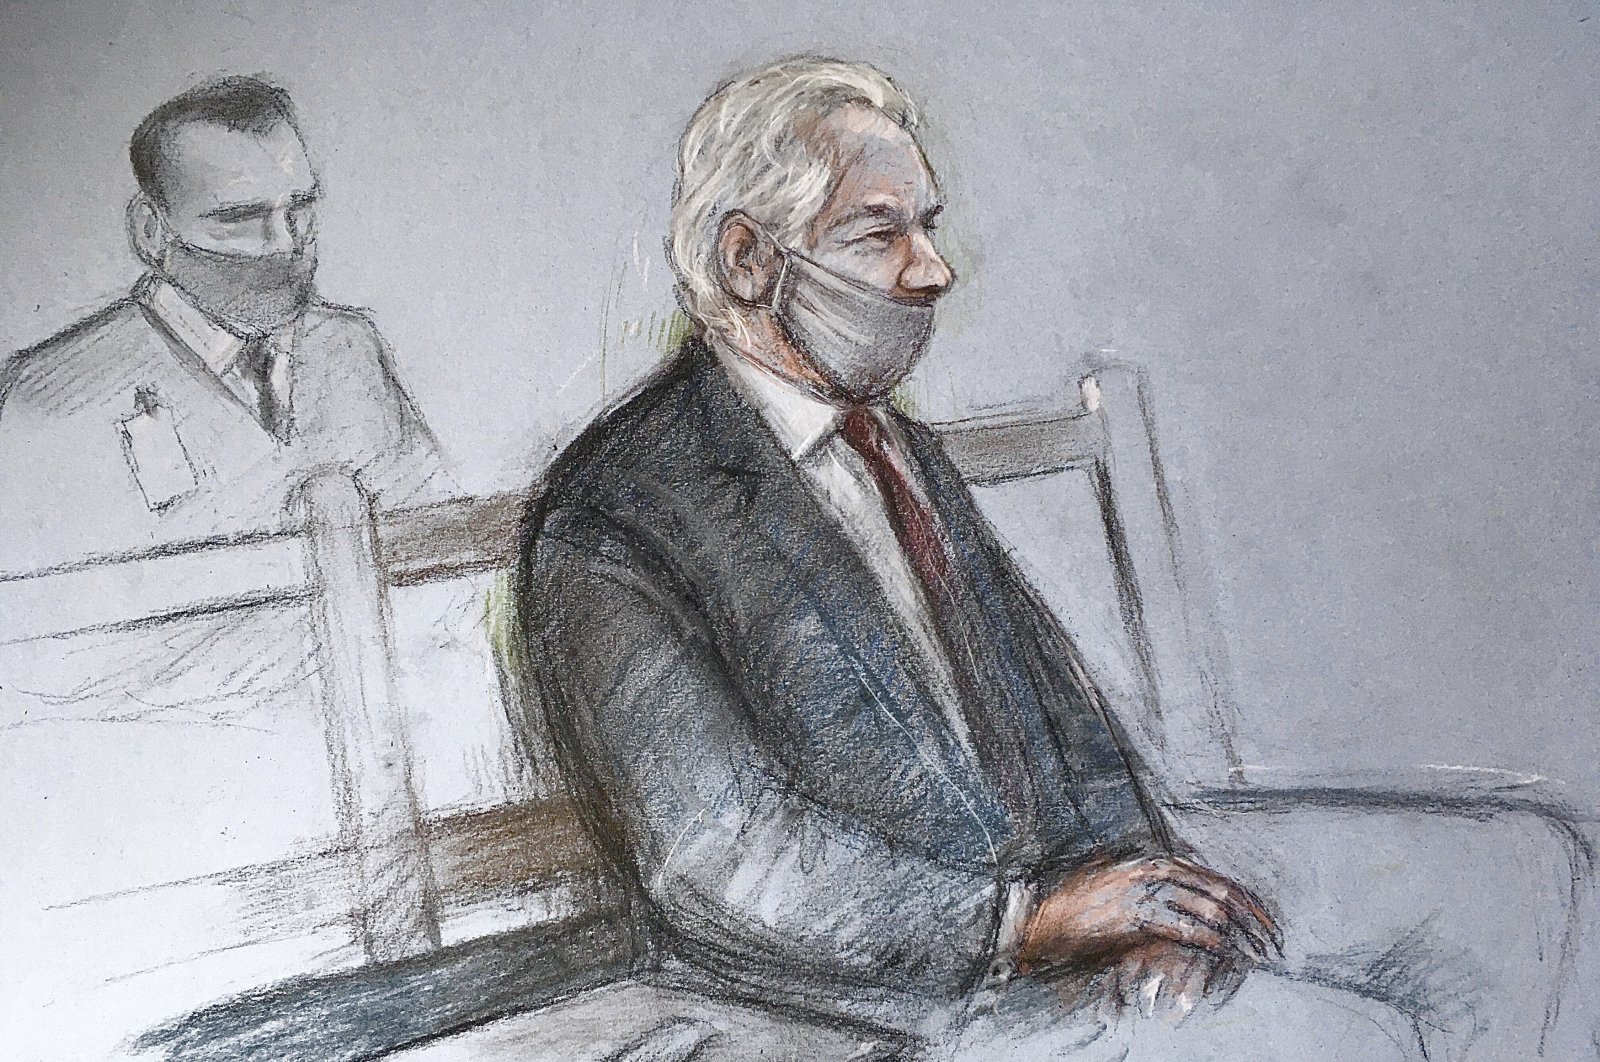 This is a court artist sketch by Elizabeth Cook of Julian Assange appearing at the Old Bailey in London for the ruling in his extradition case, in London, Monday, Jan. 4, 2021. (Elizabeth Cook / PA via AP)